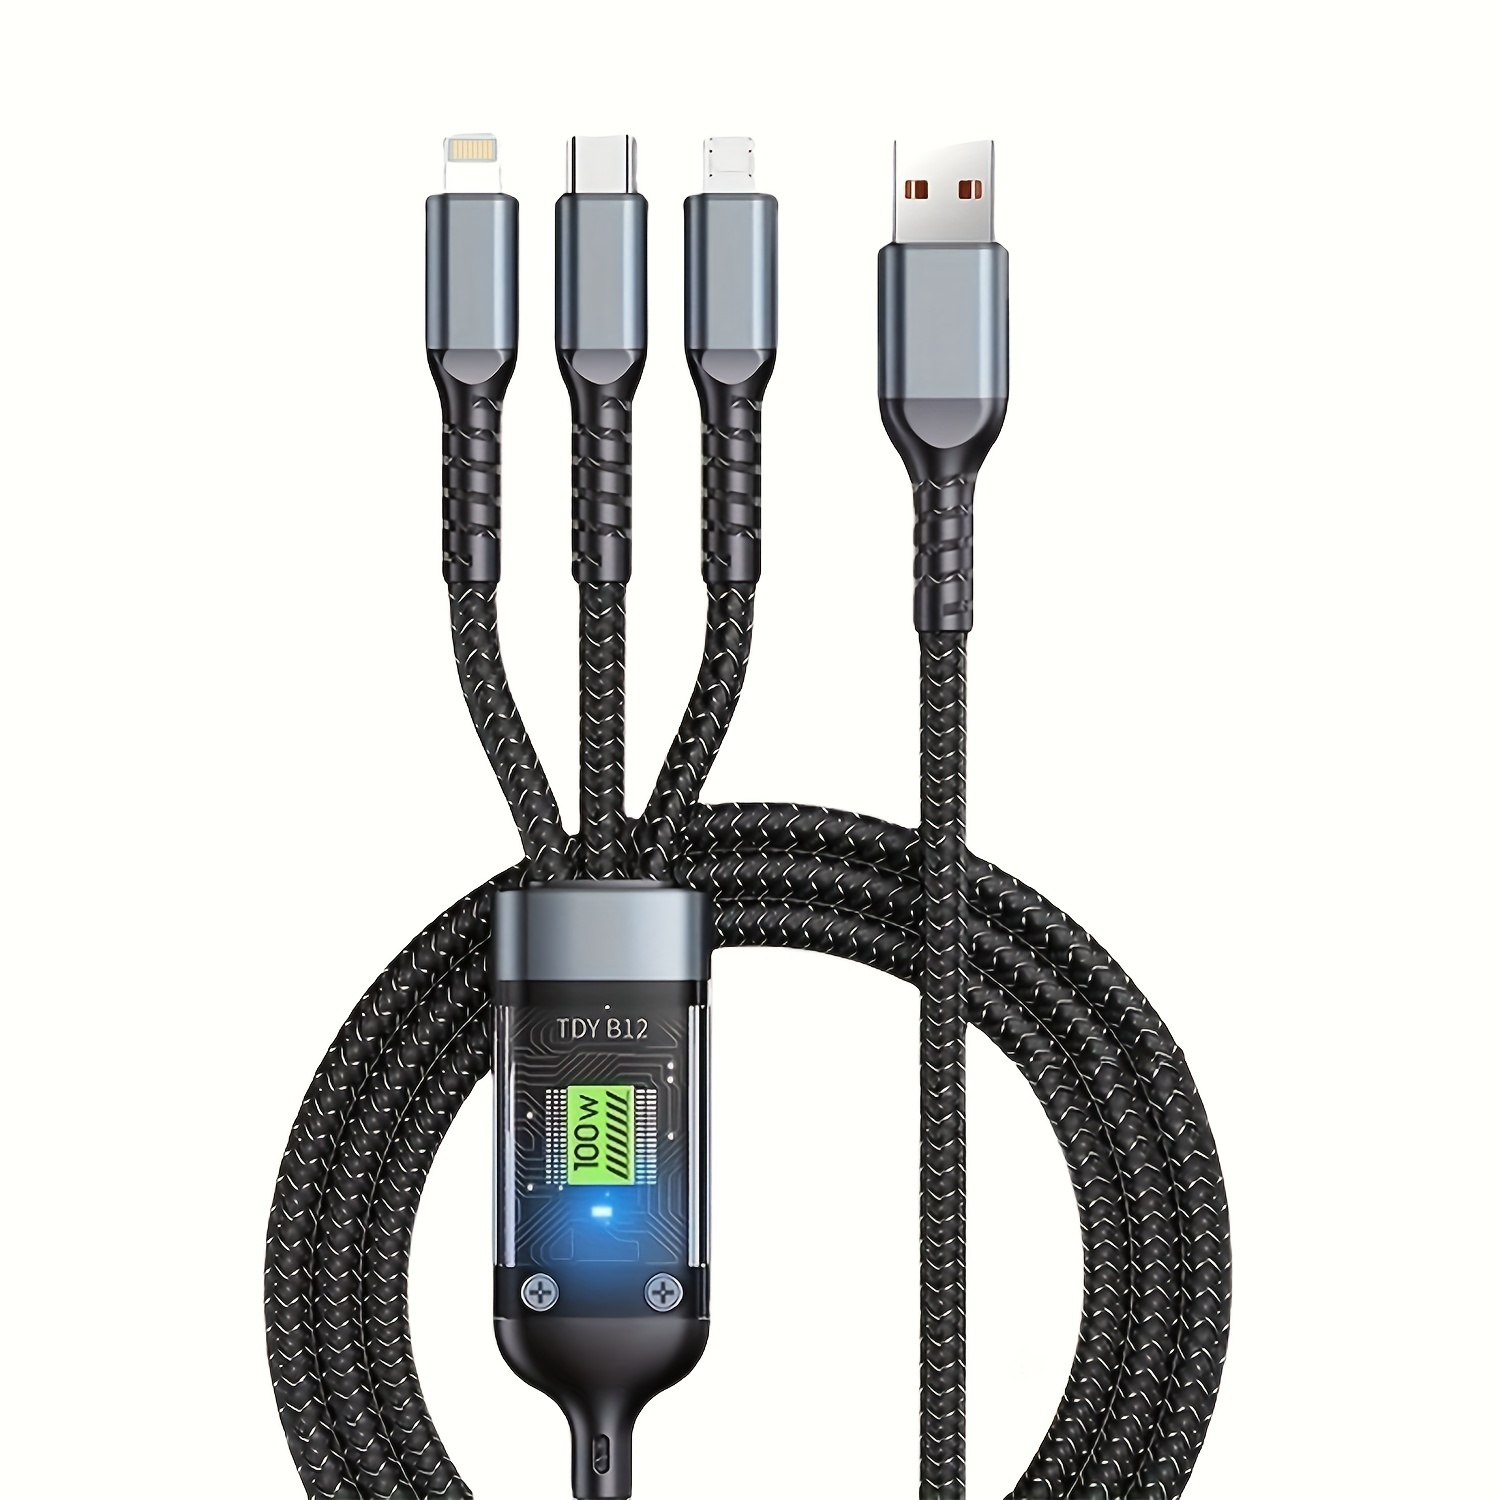 

Multi Charging Cable, (1/2pcs ) 3 In 1 Charging Cable Nylon Braided Multi Charger Cable For Multiple Devices Usb Fast Charging Cord With Type-c, Micro Usb, Ip Port For Most Phones/iphones/tablets